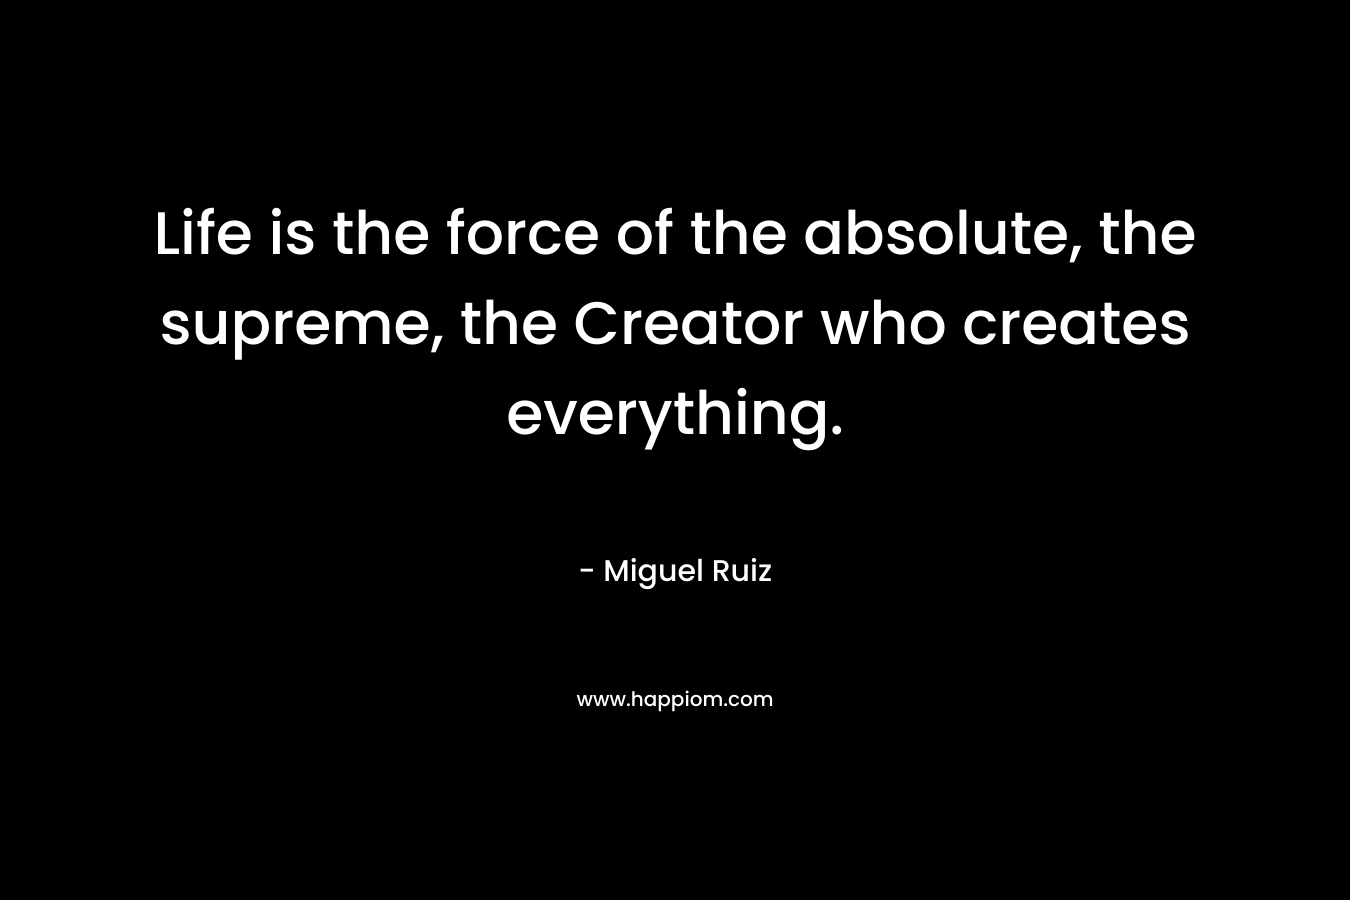 Life is the force of the absolute, the supreme, the Creator who creates everything. – Miguel Ruiz